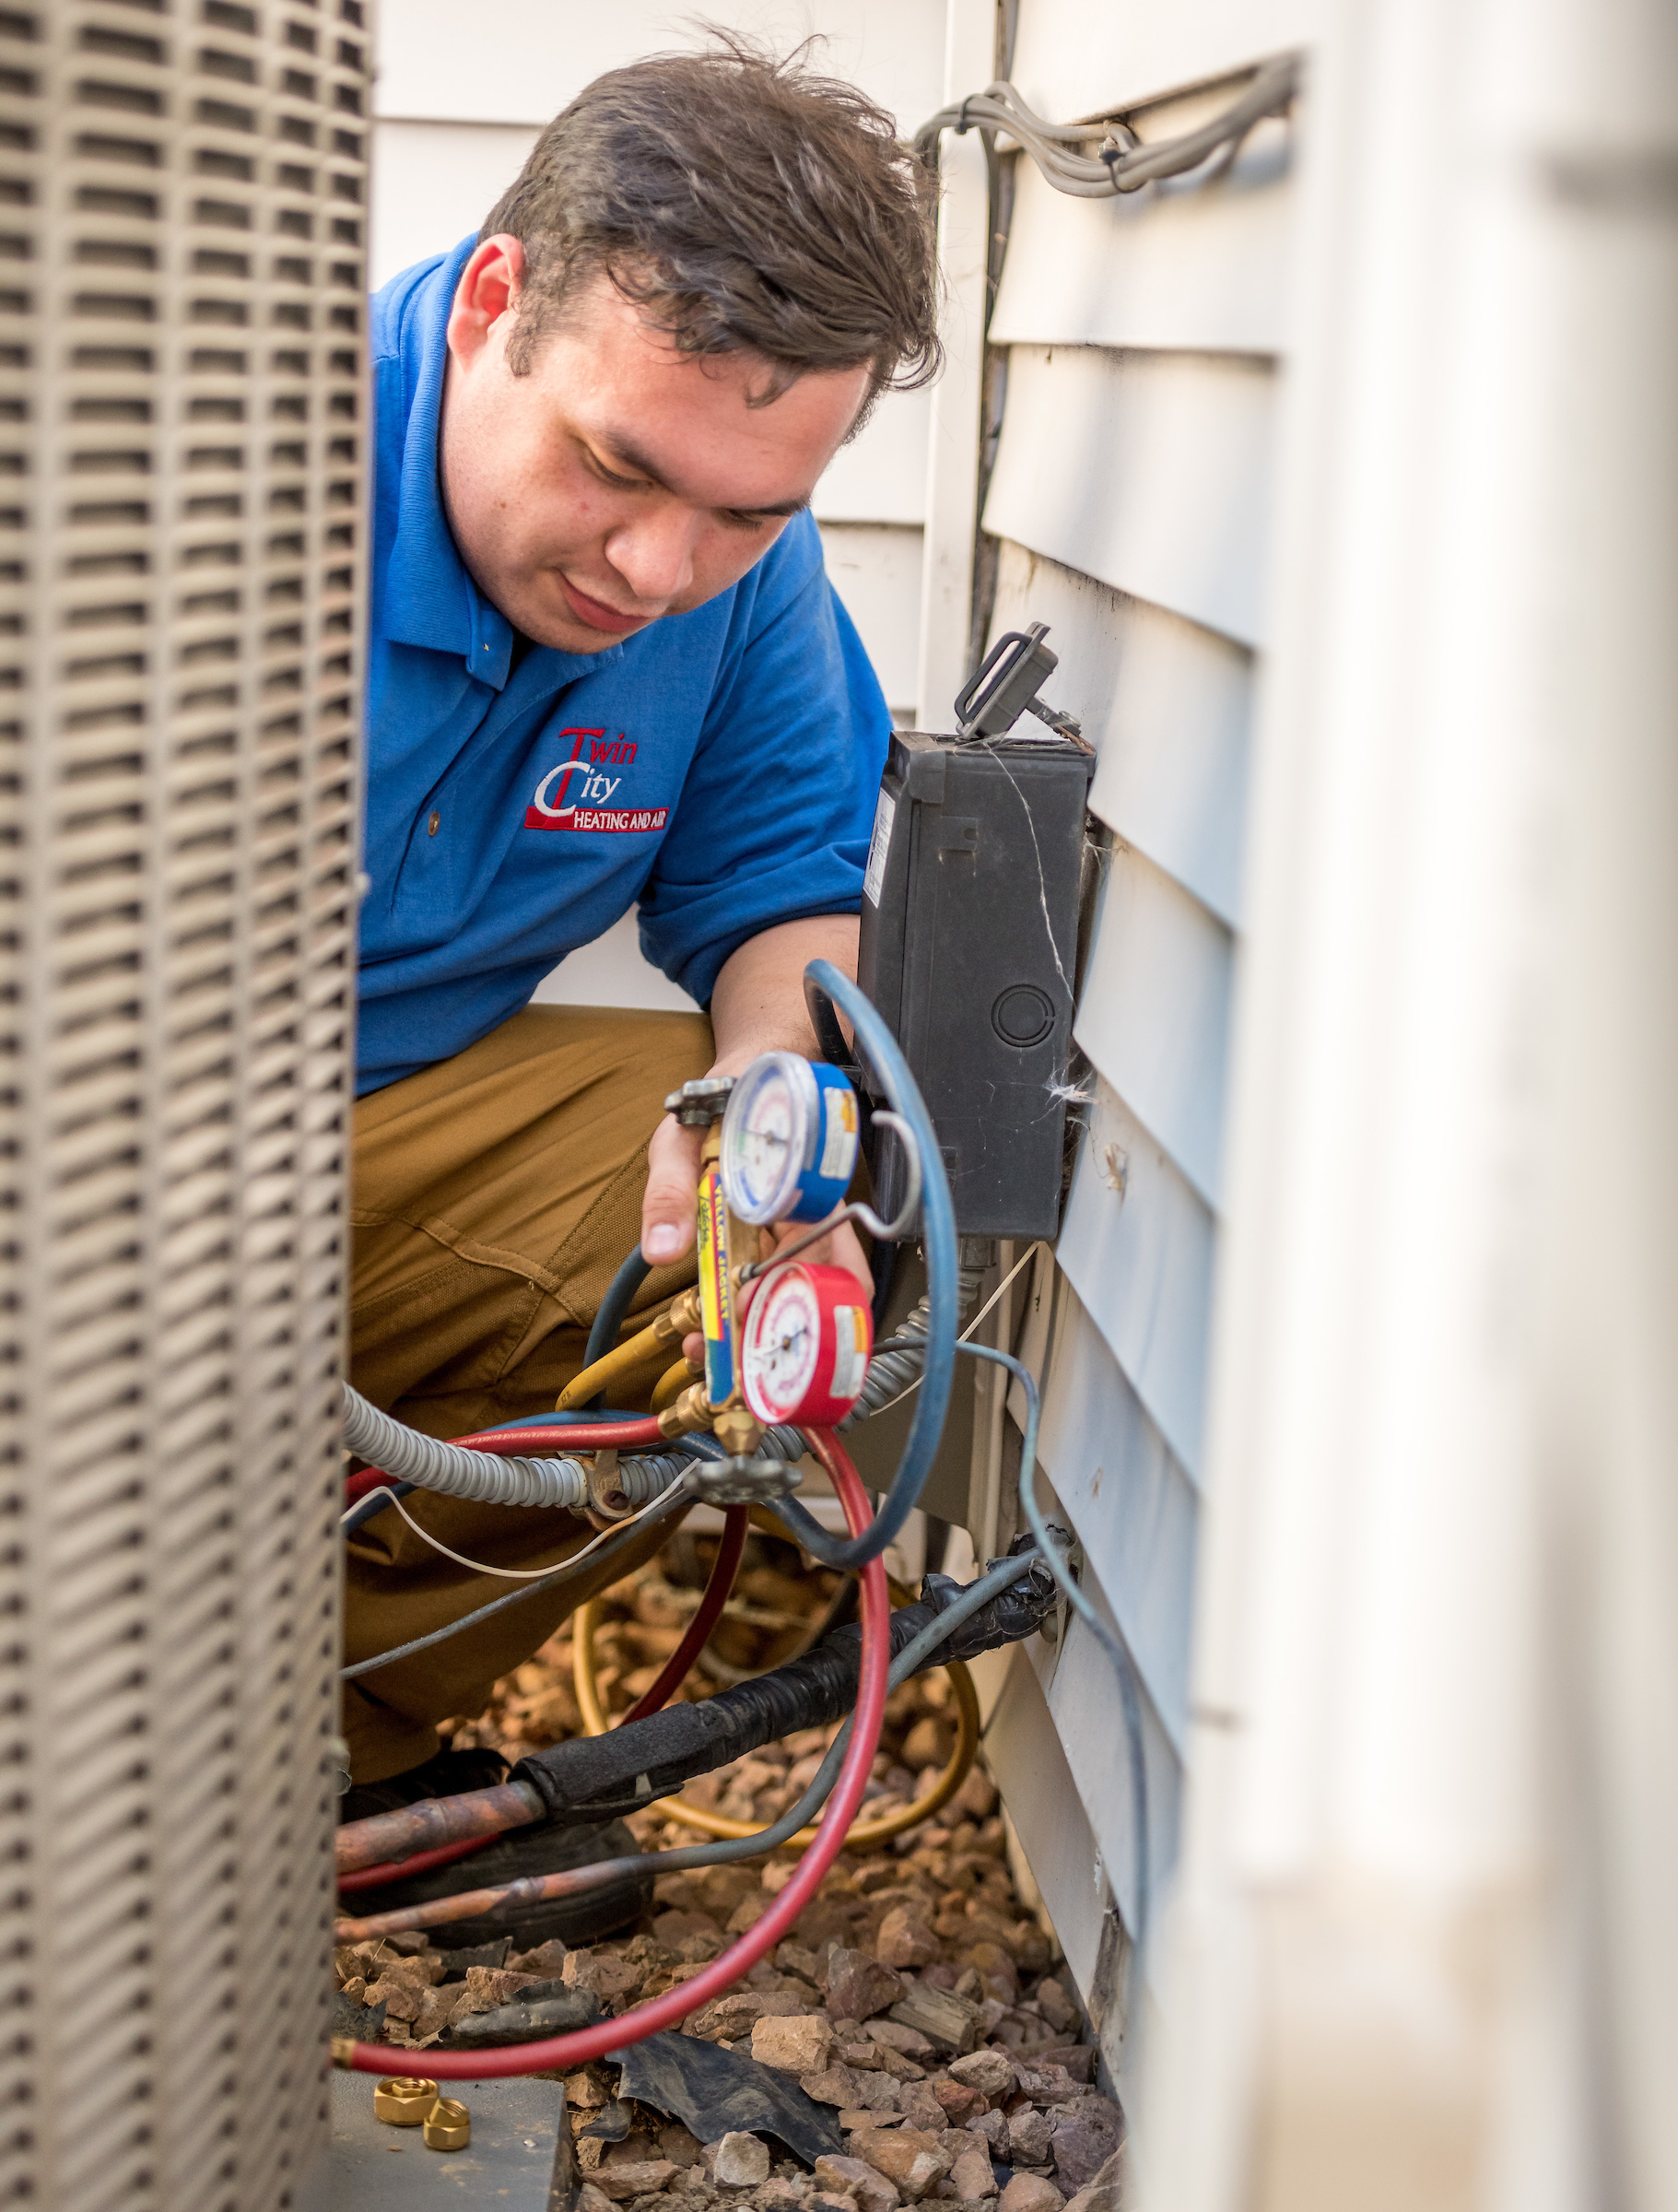 Twin-Cities-Heating-and-Air-HVAC-Minneapolis-MN-commercial-photographer-July 20, 2016--014.jpg